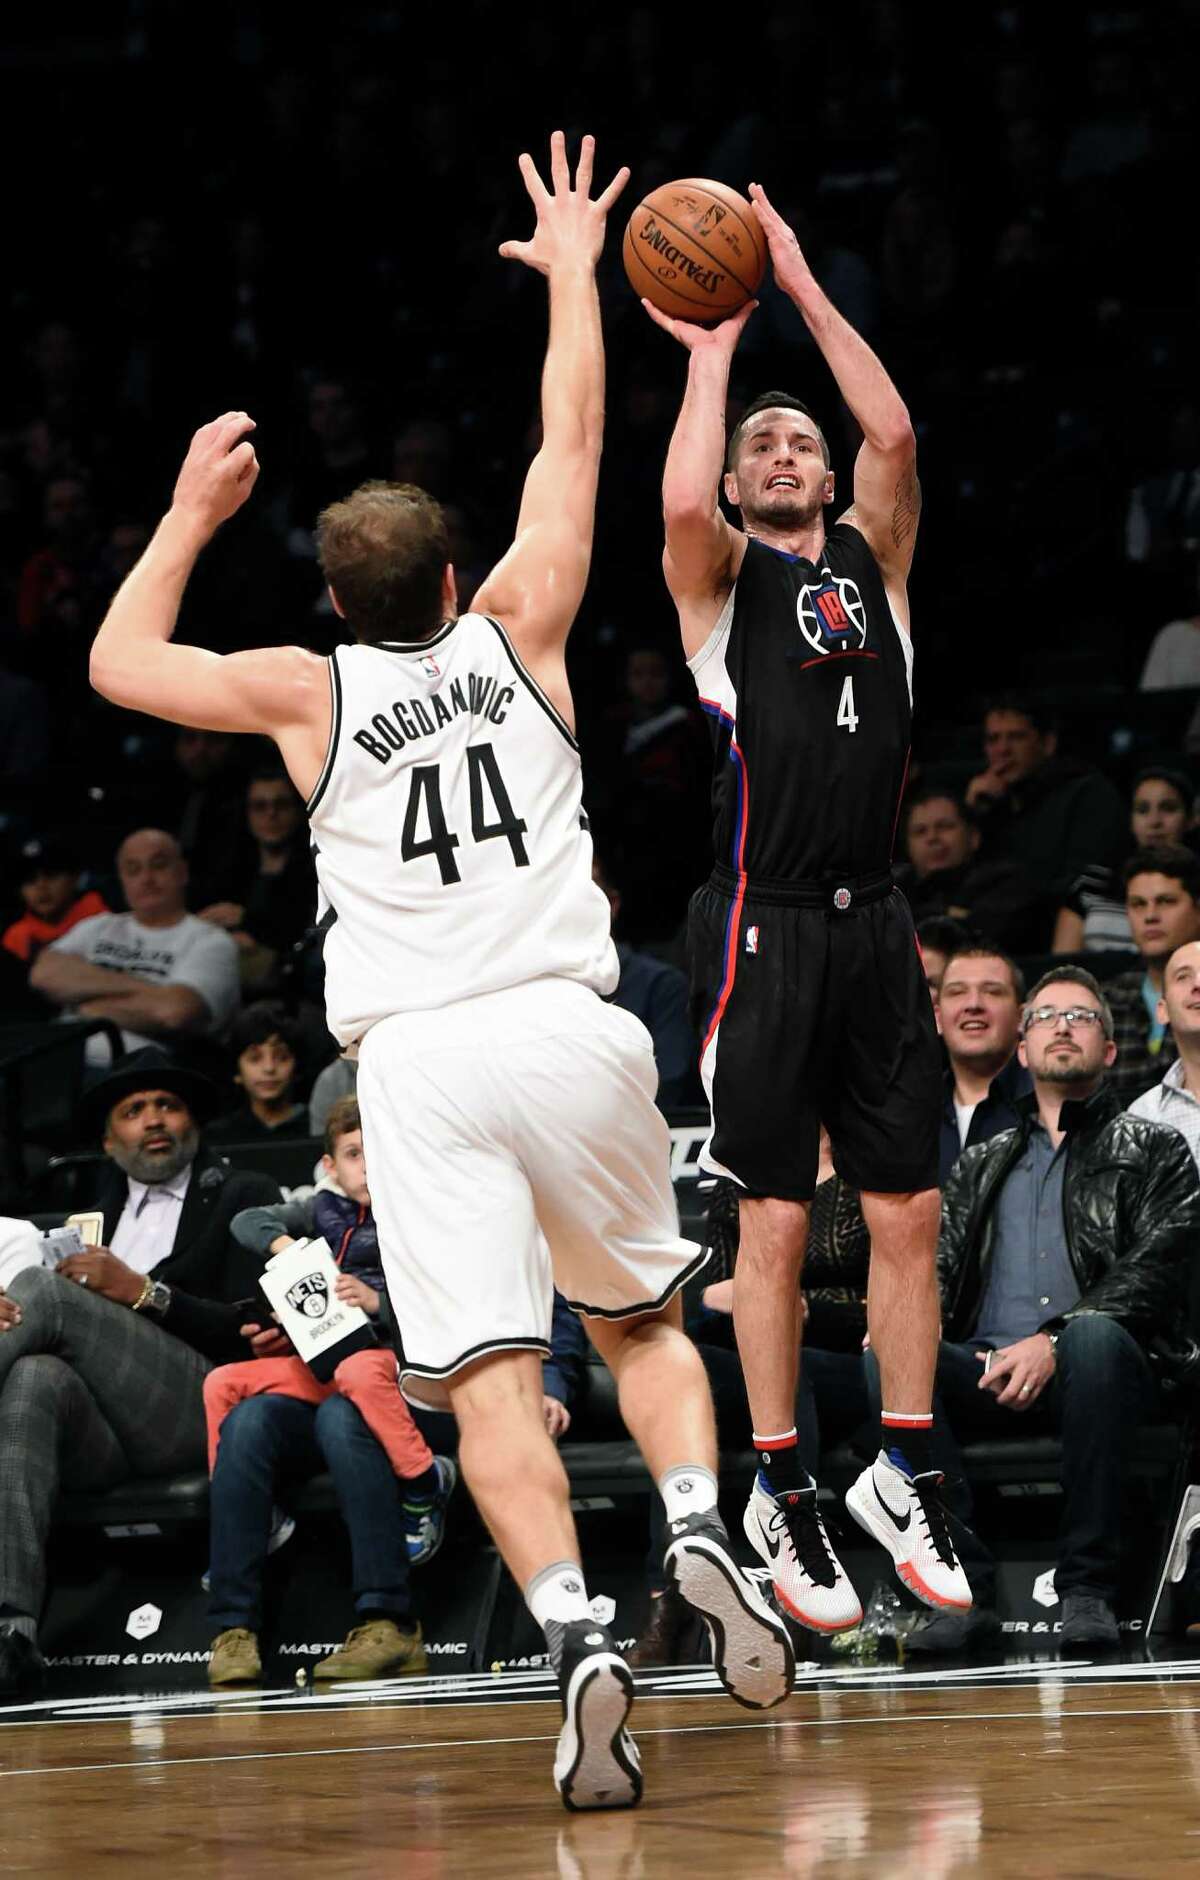 Los Angeles Clippers guard J.J. Redick (4) takes aim for the basket over Brooklyn Nets guard Bojan Bogdanovic (44) during the first half of an NBA basketball game on Saturday, Dec. 12, 2015, in New York. (AP Photo/Kathy Kmonicek)